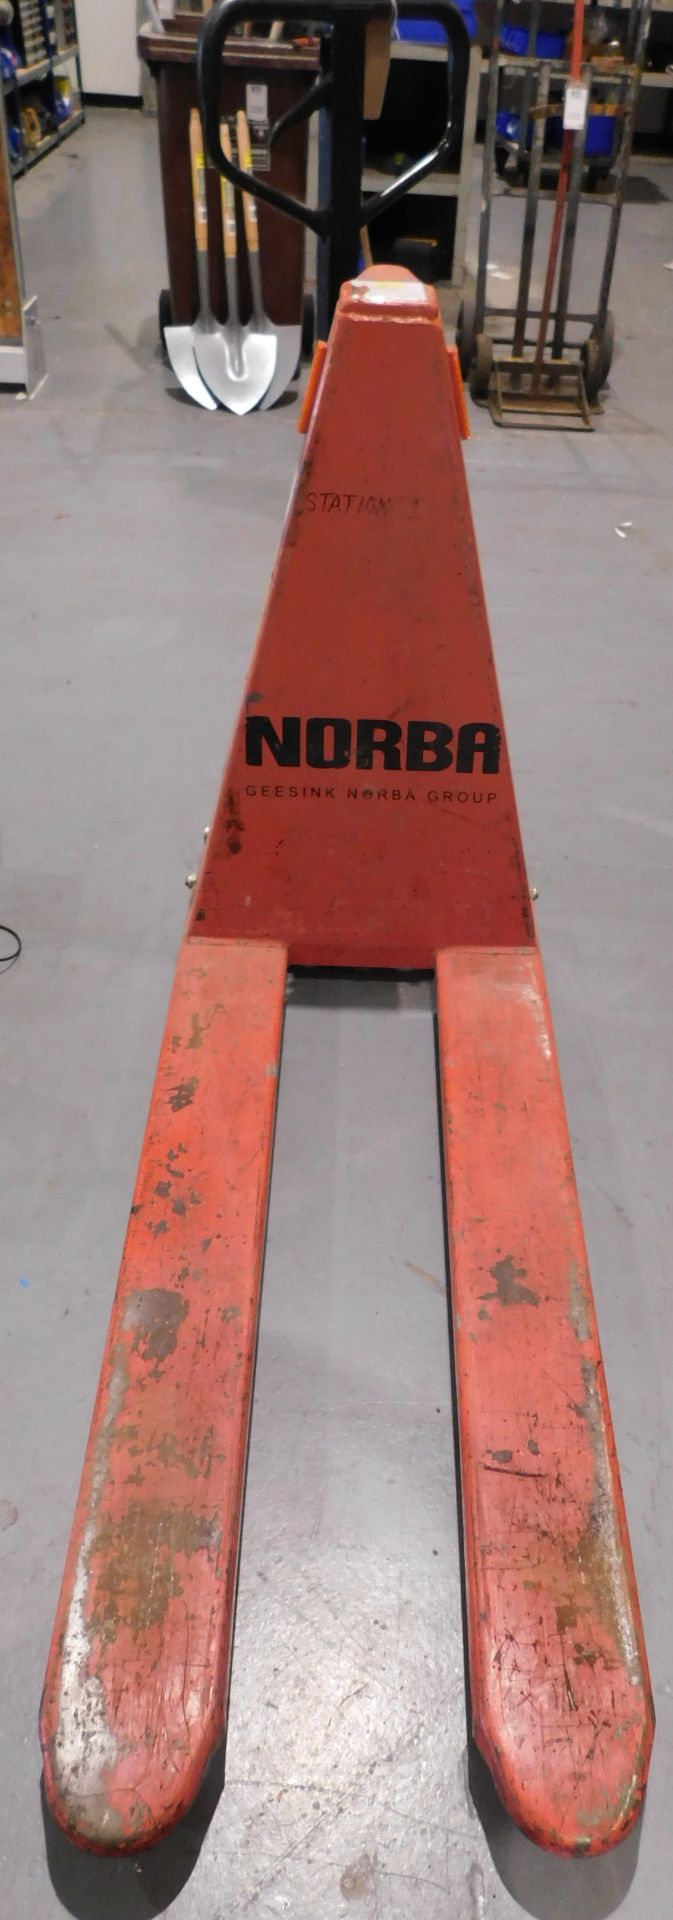 1000kg High Lift Pallet Truck (Located Rugby. Please Refer to General Notes) - Image 3 of 3